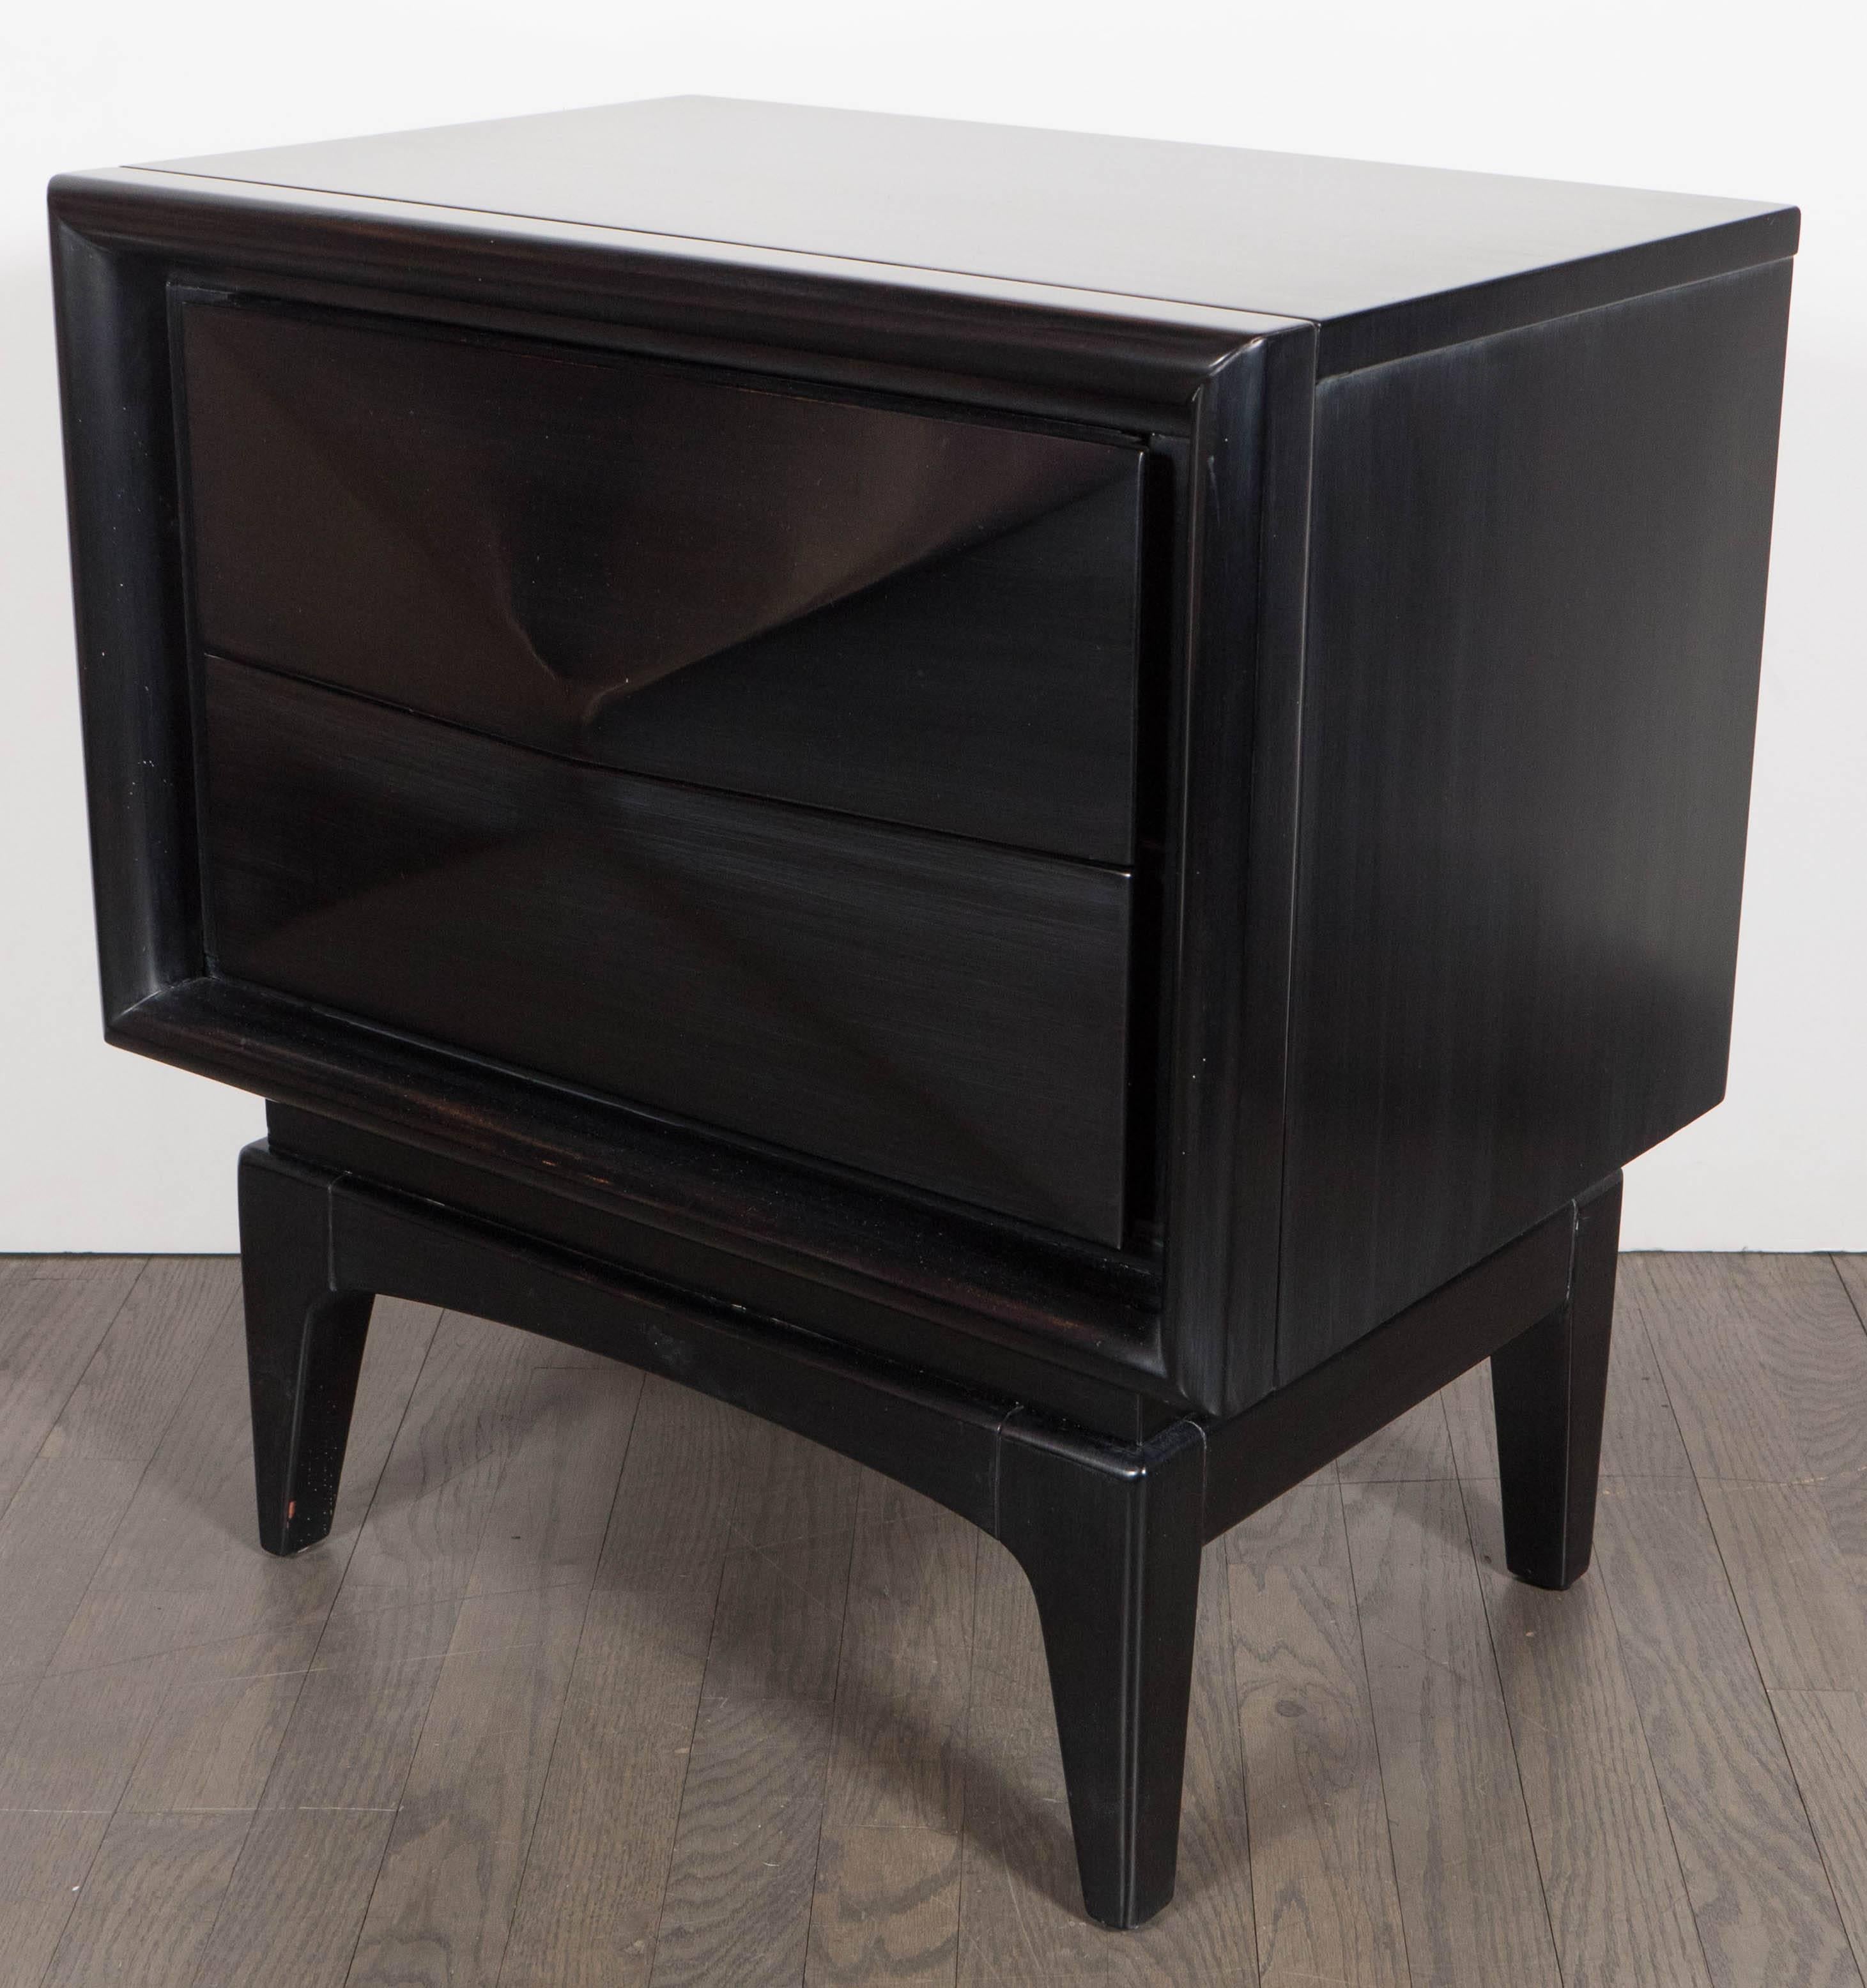 Ebonized Pair of Mid-Century Modernist Cubist Nightstands with Angular Fronted Drawers